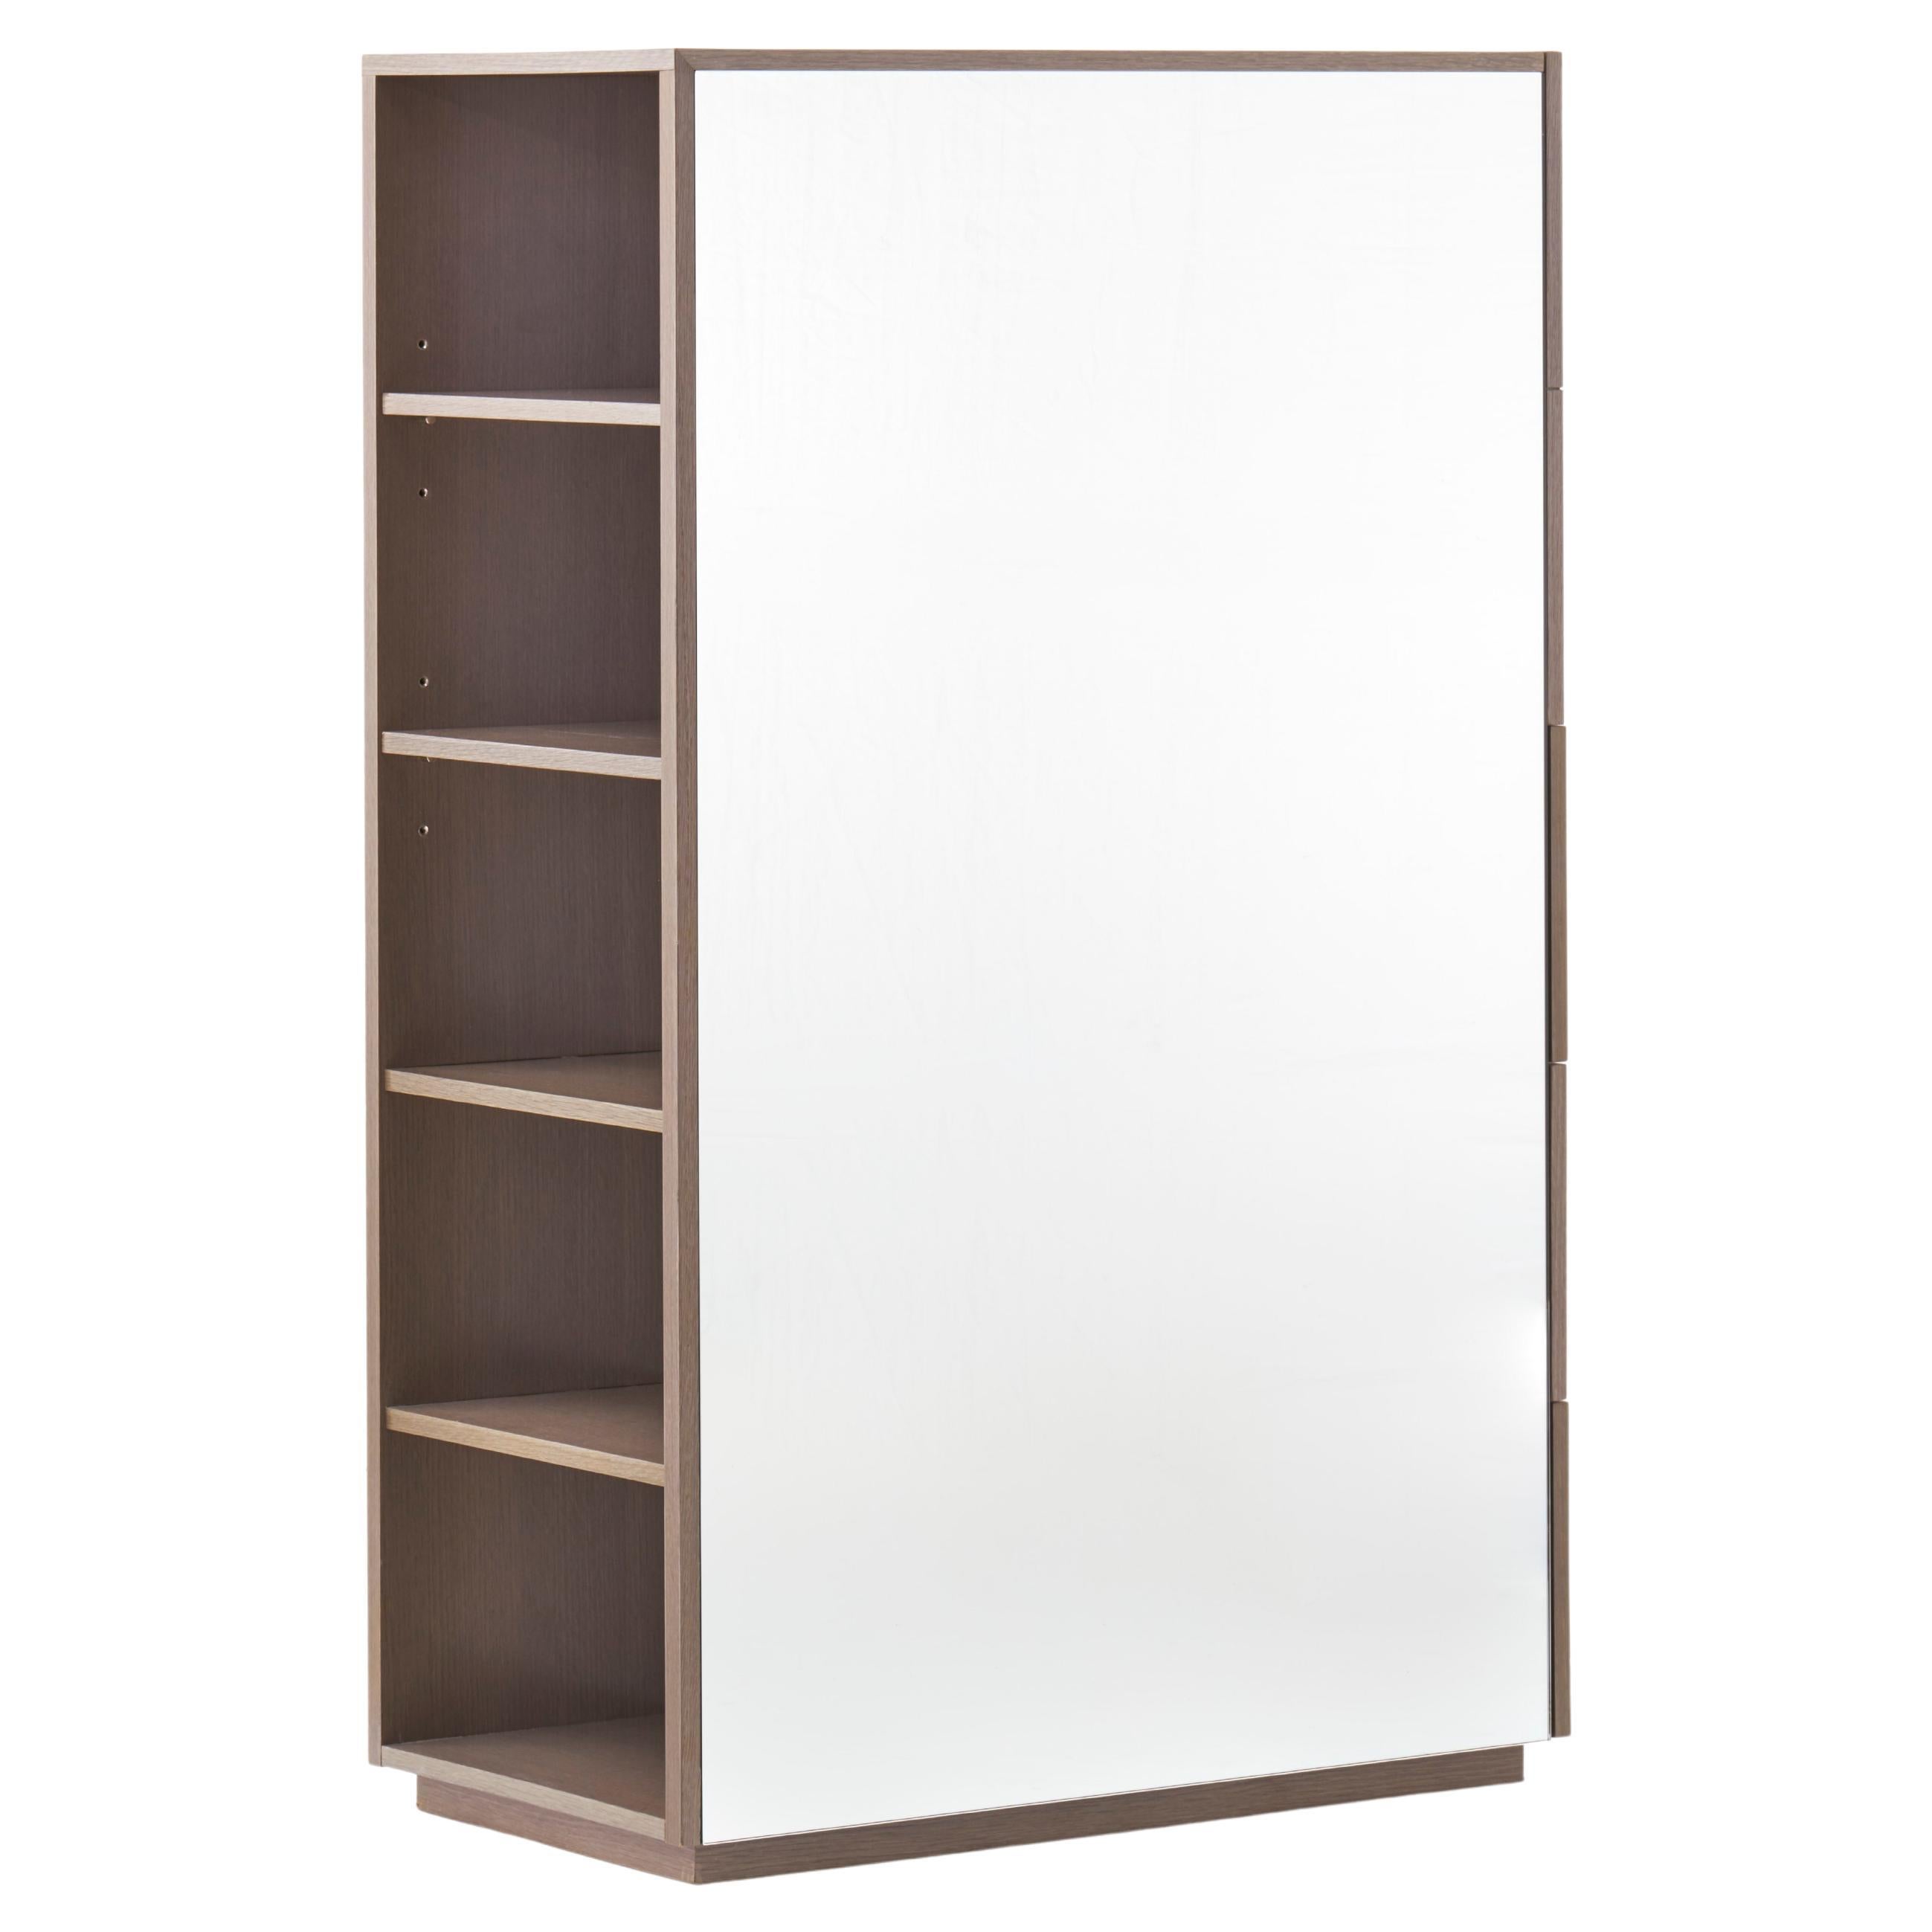 Mirrored Cabinet, with a Desk Option For Sale